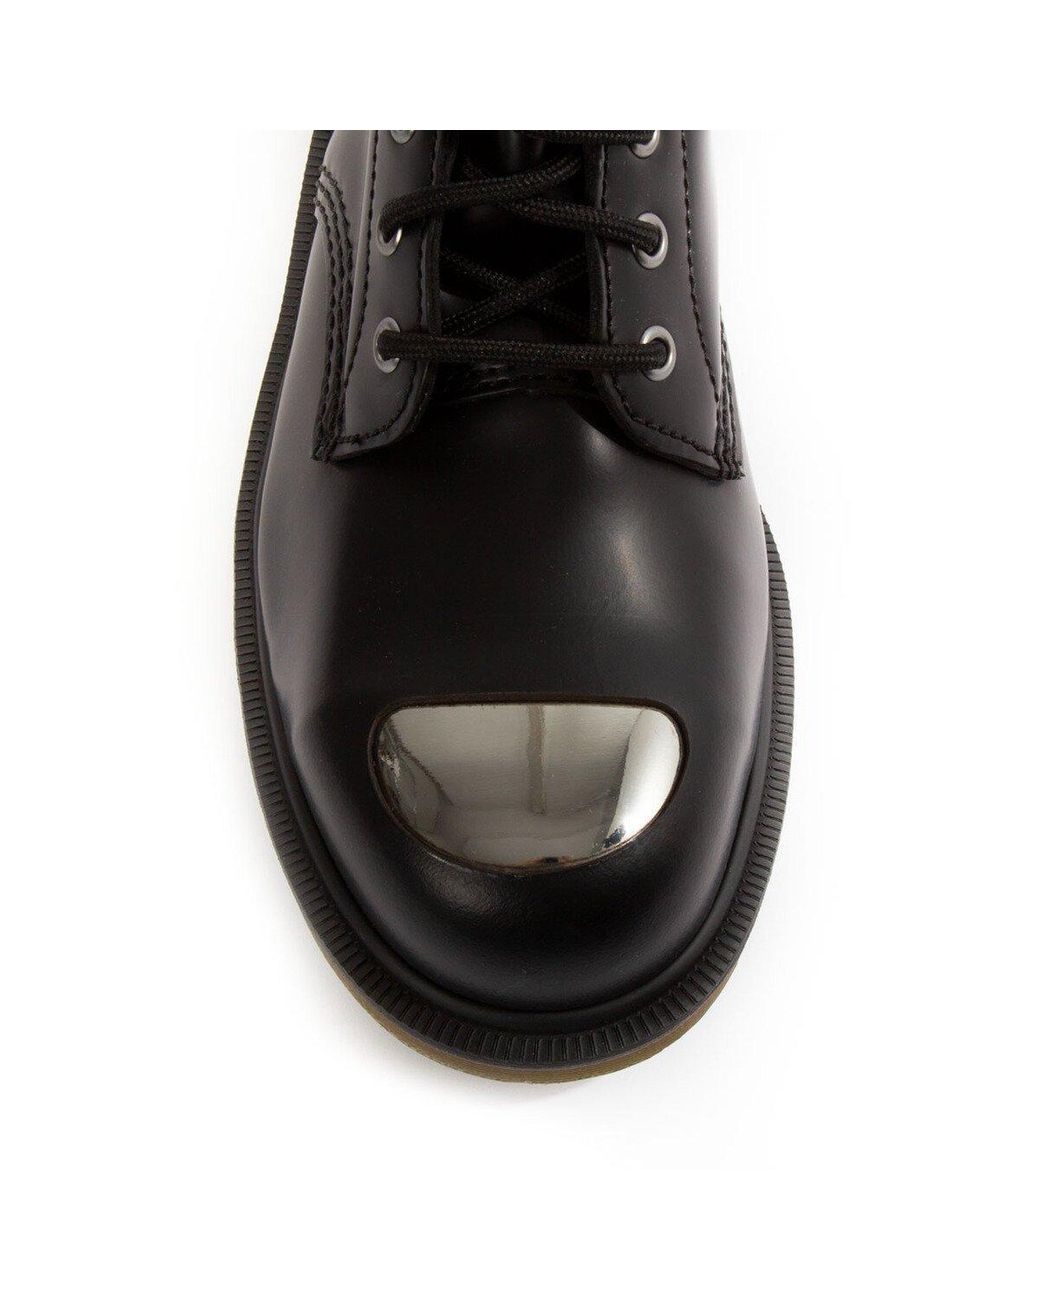 Dr. Martens 101 Exposed Steel Toe Leather Boots In Black | Lyst